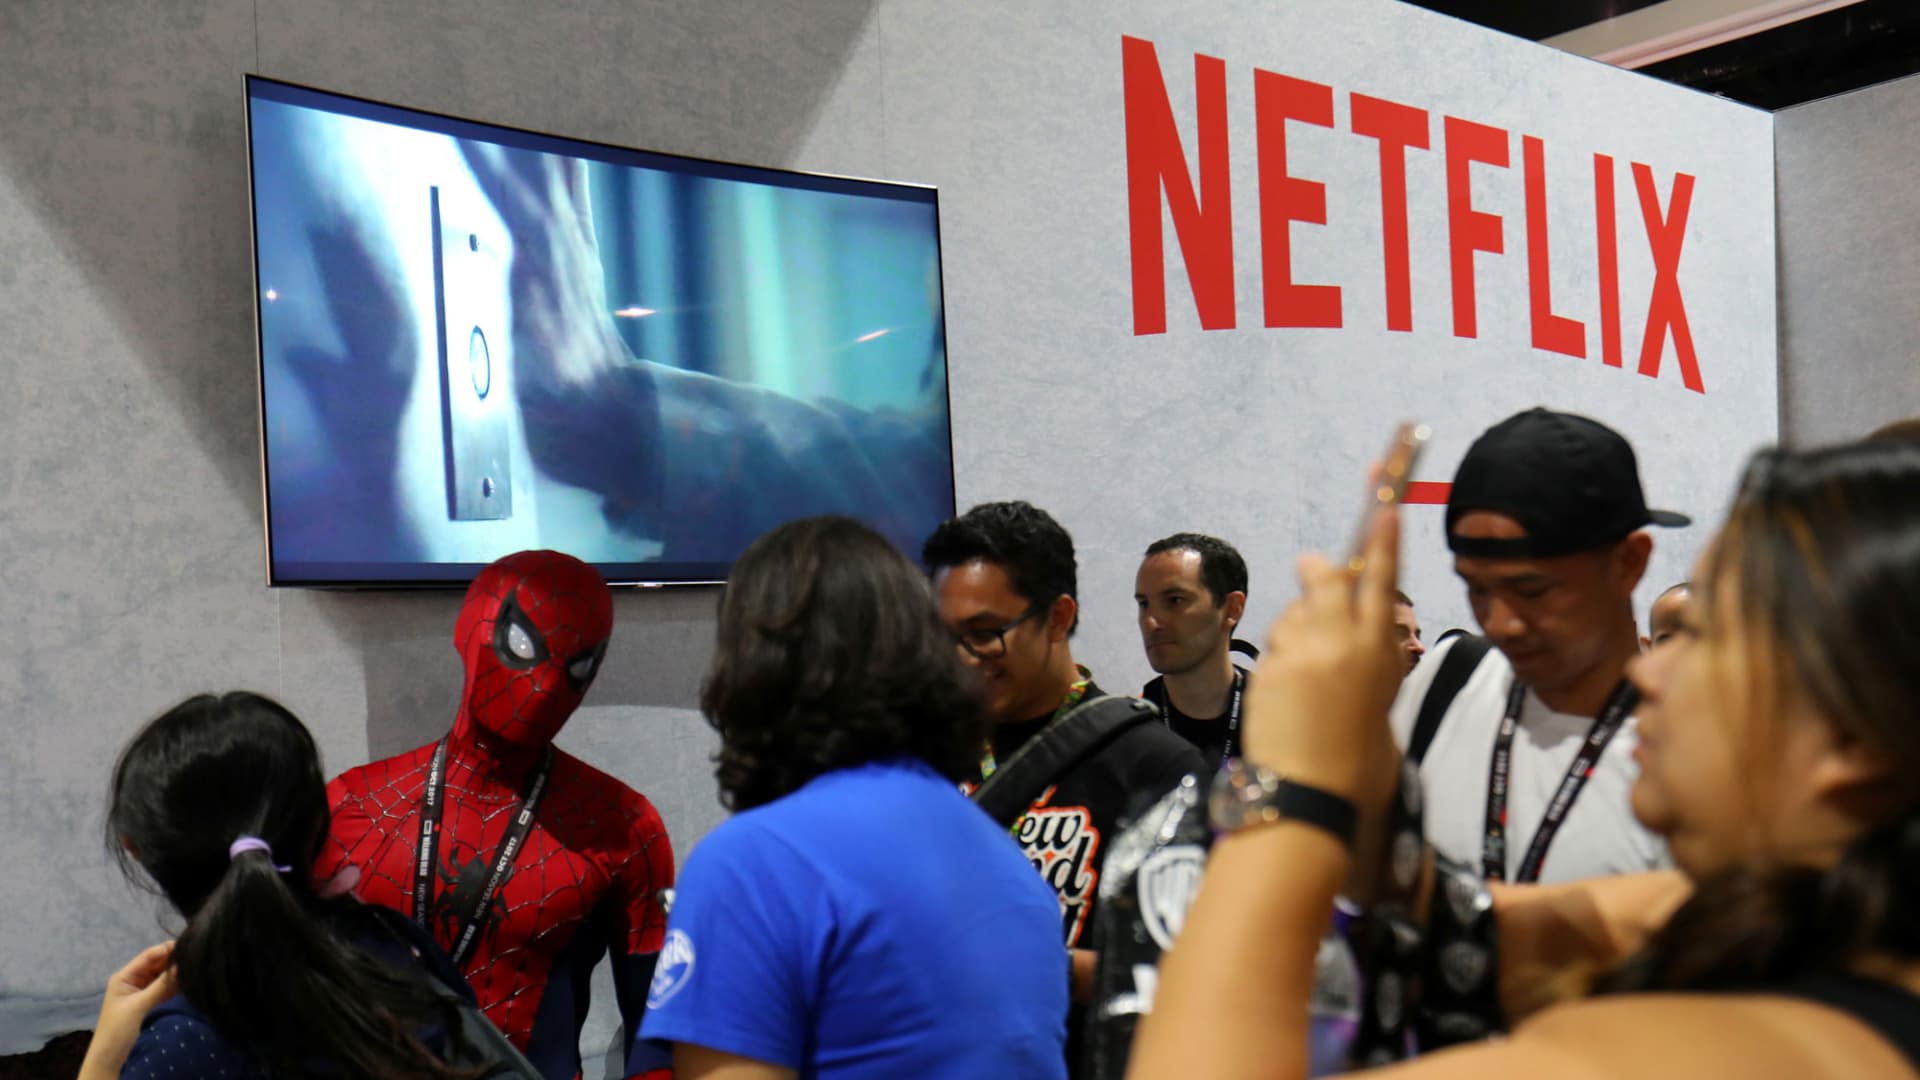 Stocks making the biggest moves after hours: Netflix, IBM, Disney and more